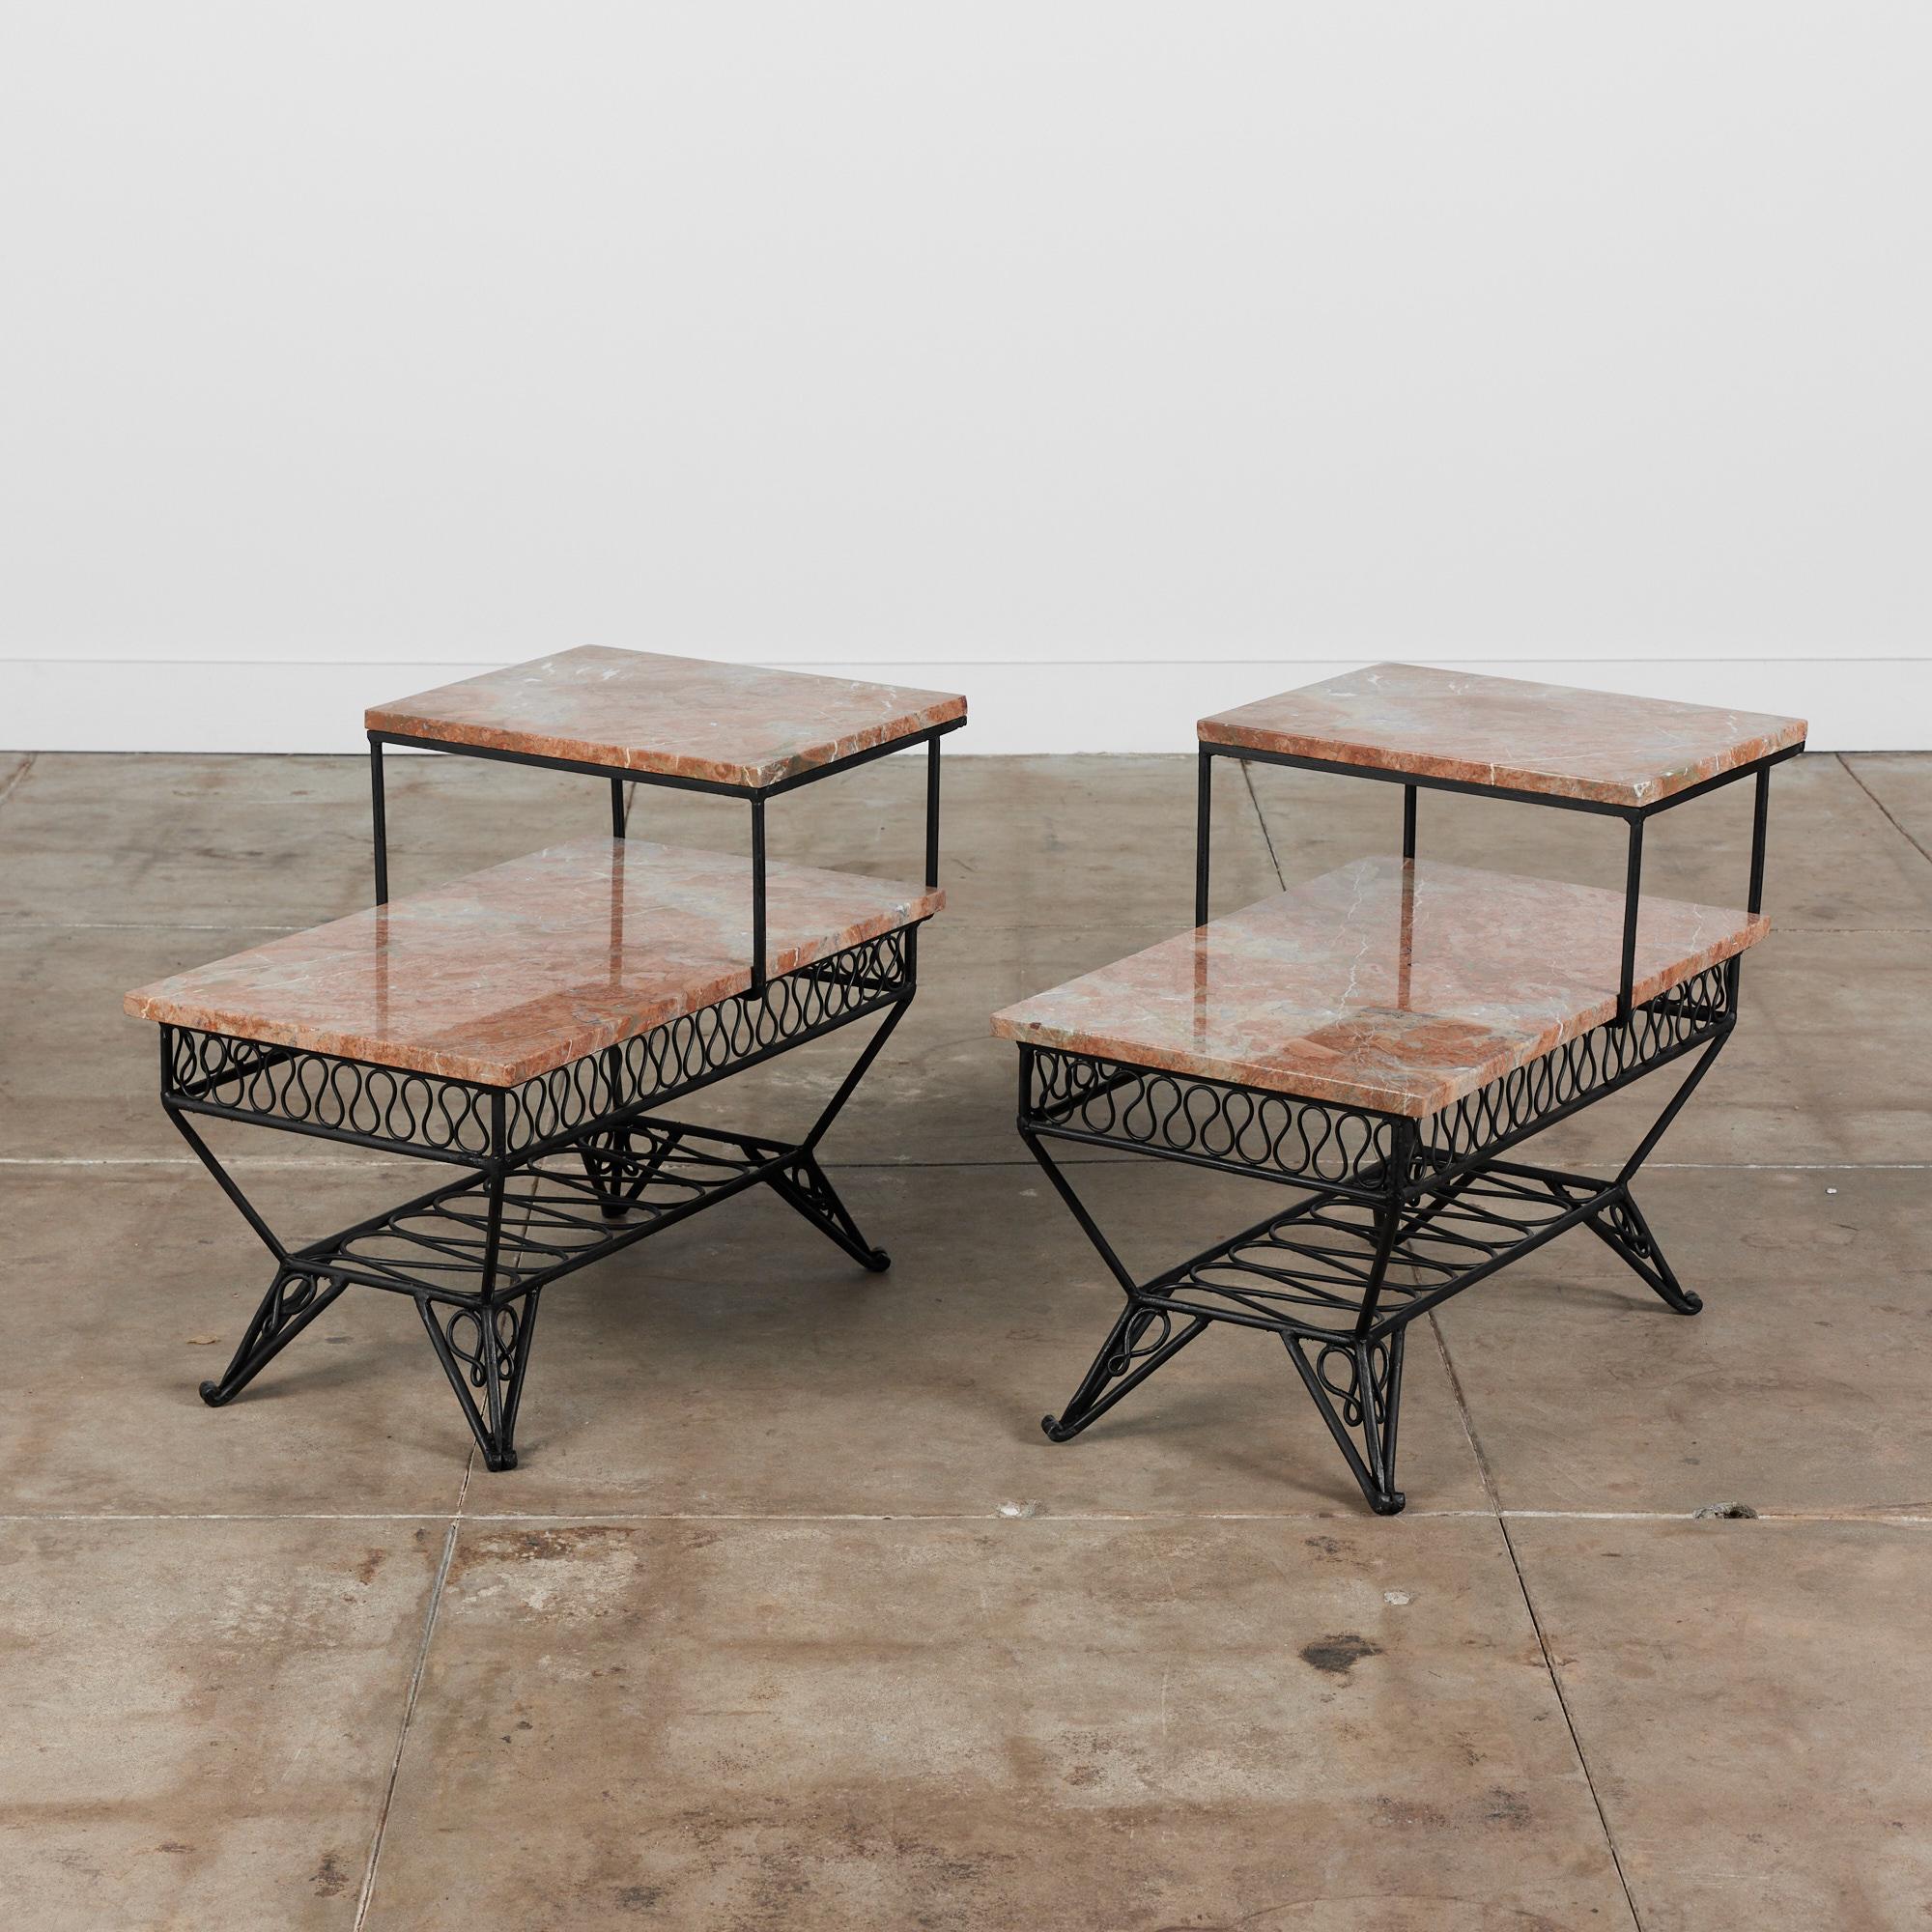 Side tables in the style of Maurizio Tempestini for John Salterini, USA, circa 1950s. The rectangular two tier side tables feature Tempestini's ribbon style detailing under the base of the table tops. The tables have been newly powdered coated in a